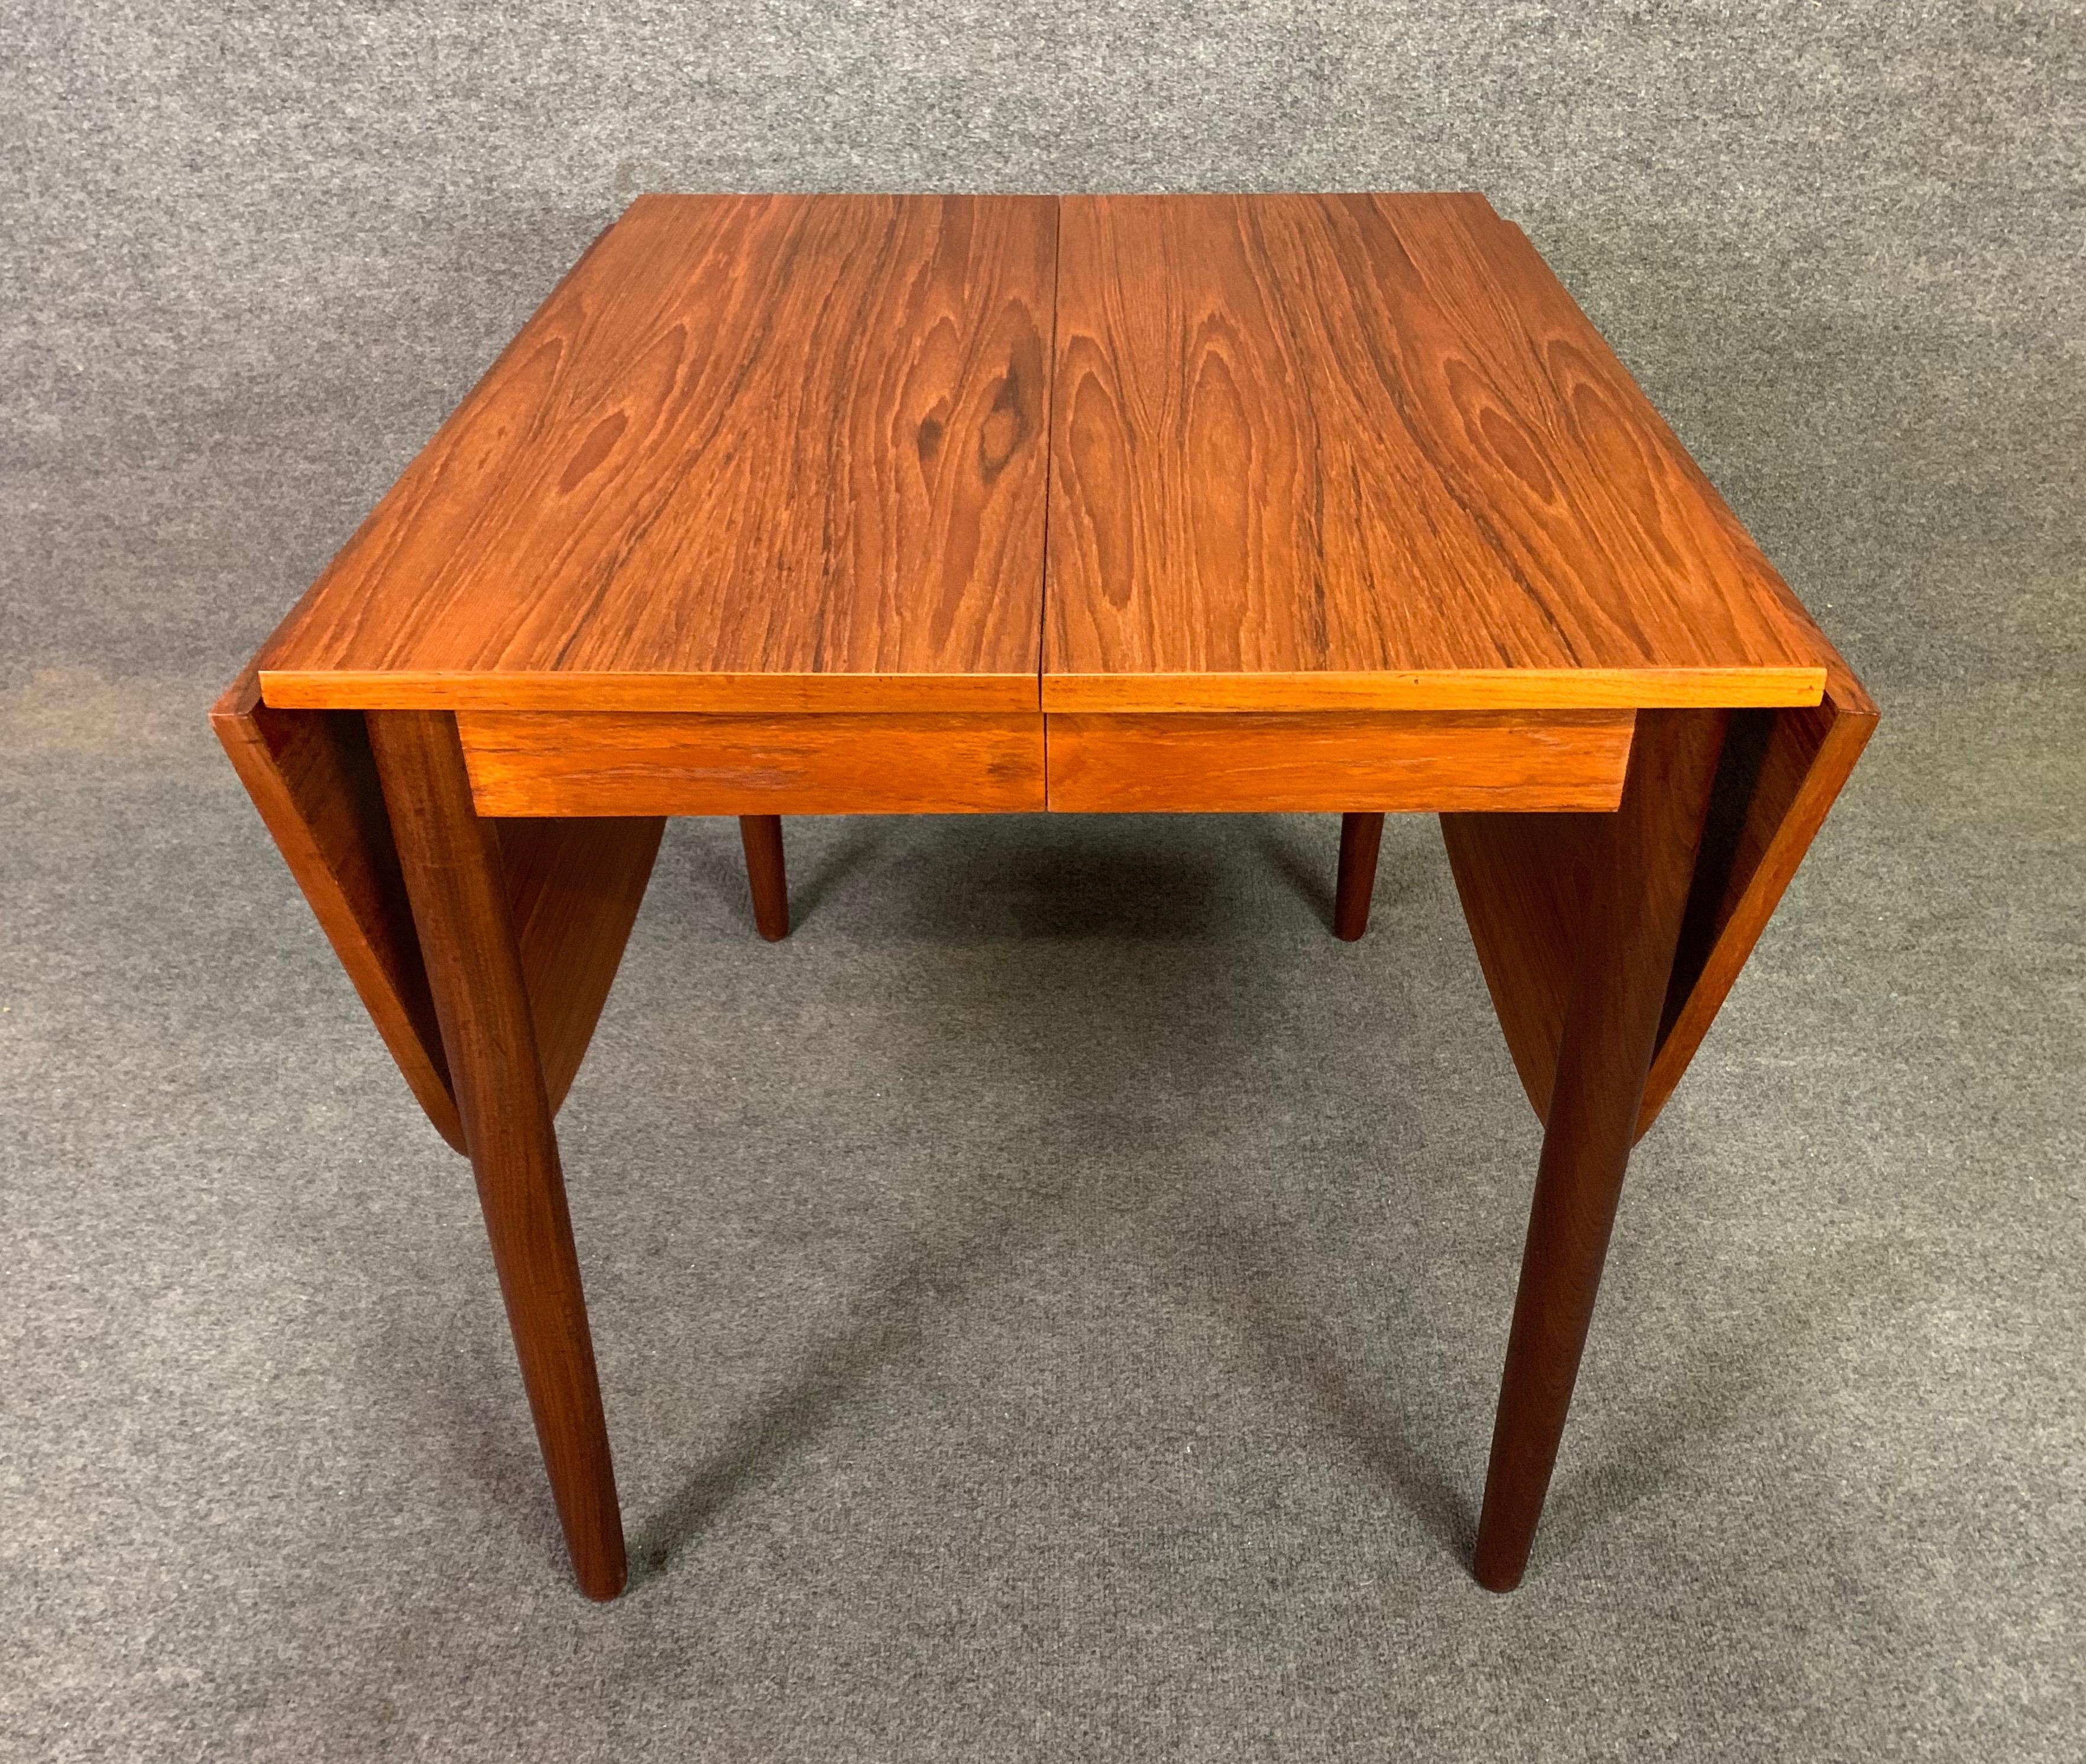 Here is a beautiful 1960s Scandinavia Modern dining table teak wood with recently imported from Denmark to California before its refinishing.
This special table features a vibrant wood grain, two drop leaves, two middles leaves and four tapered